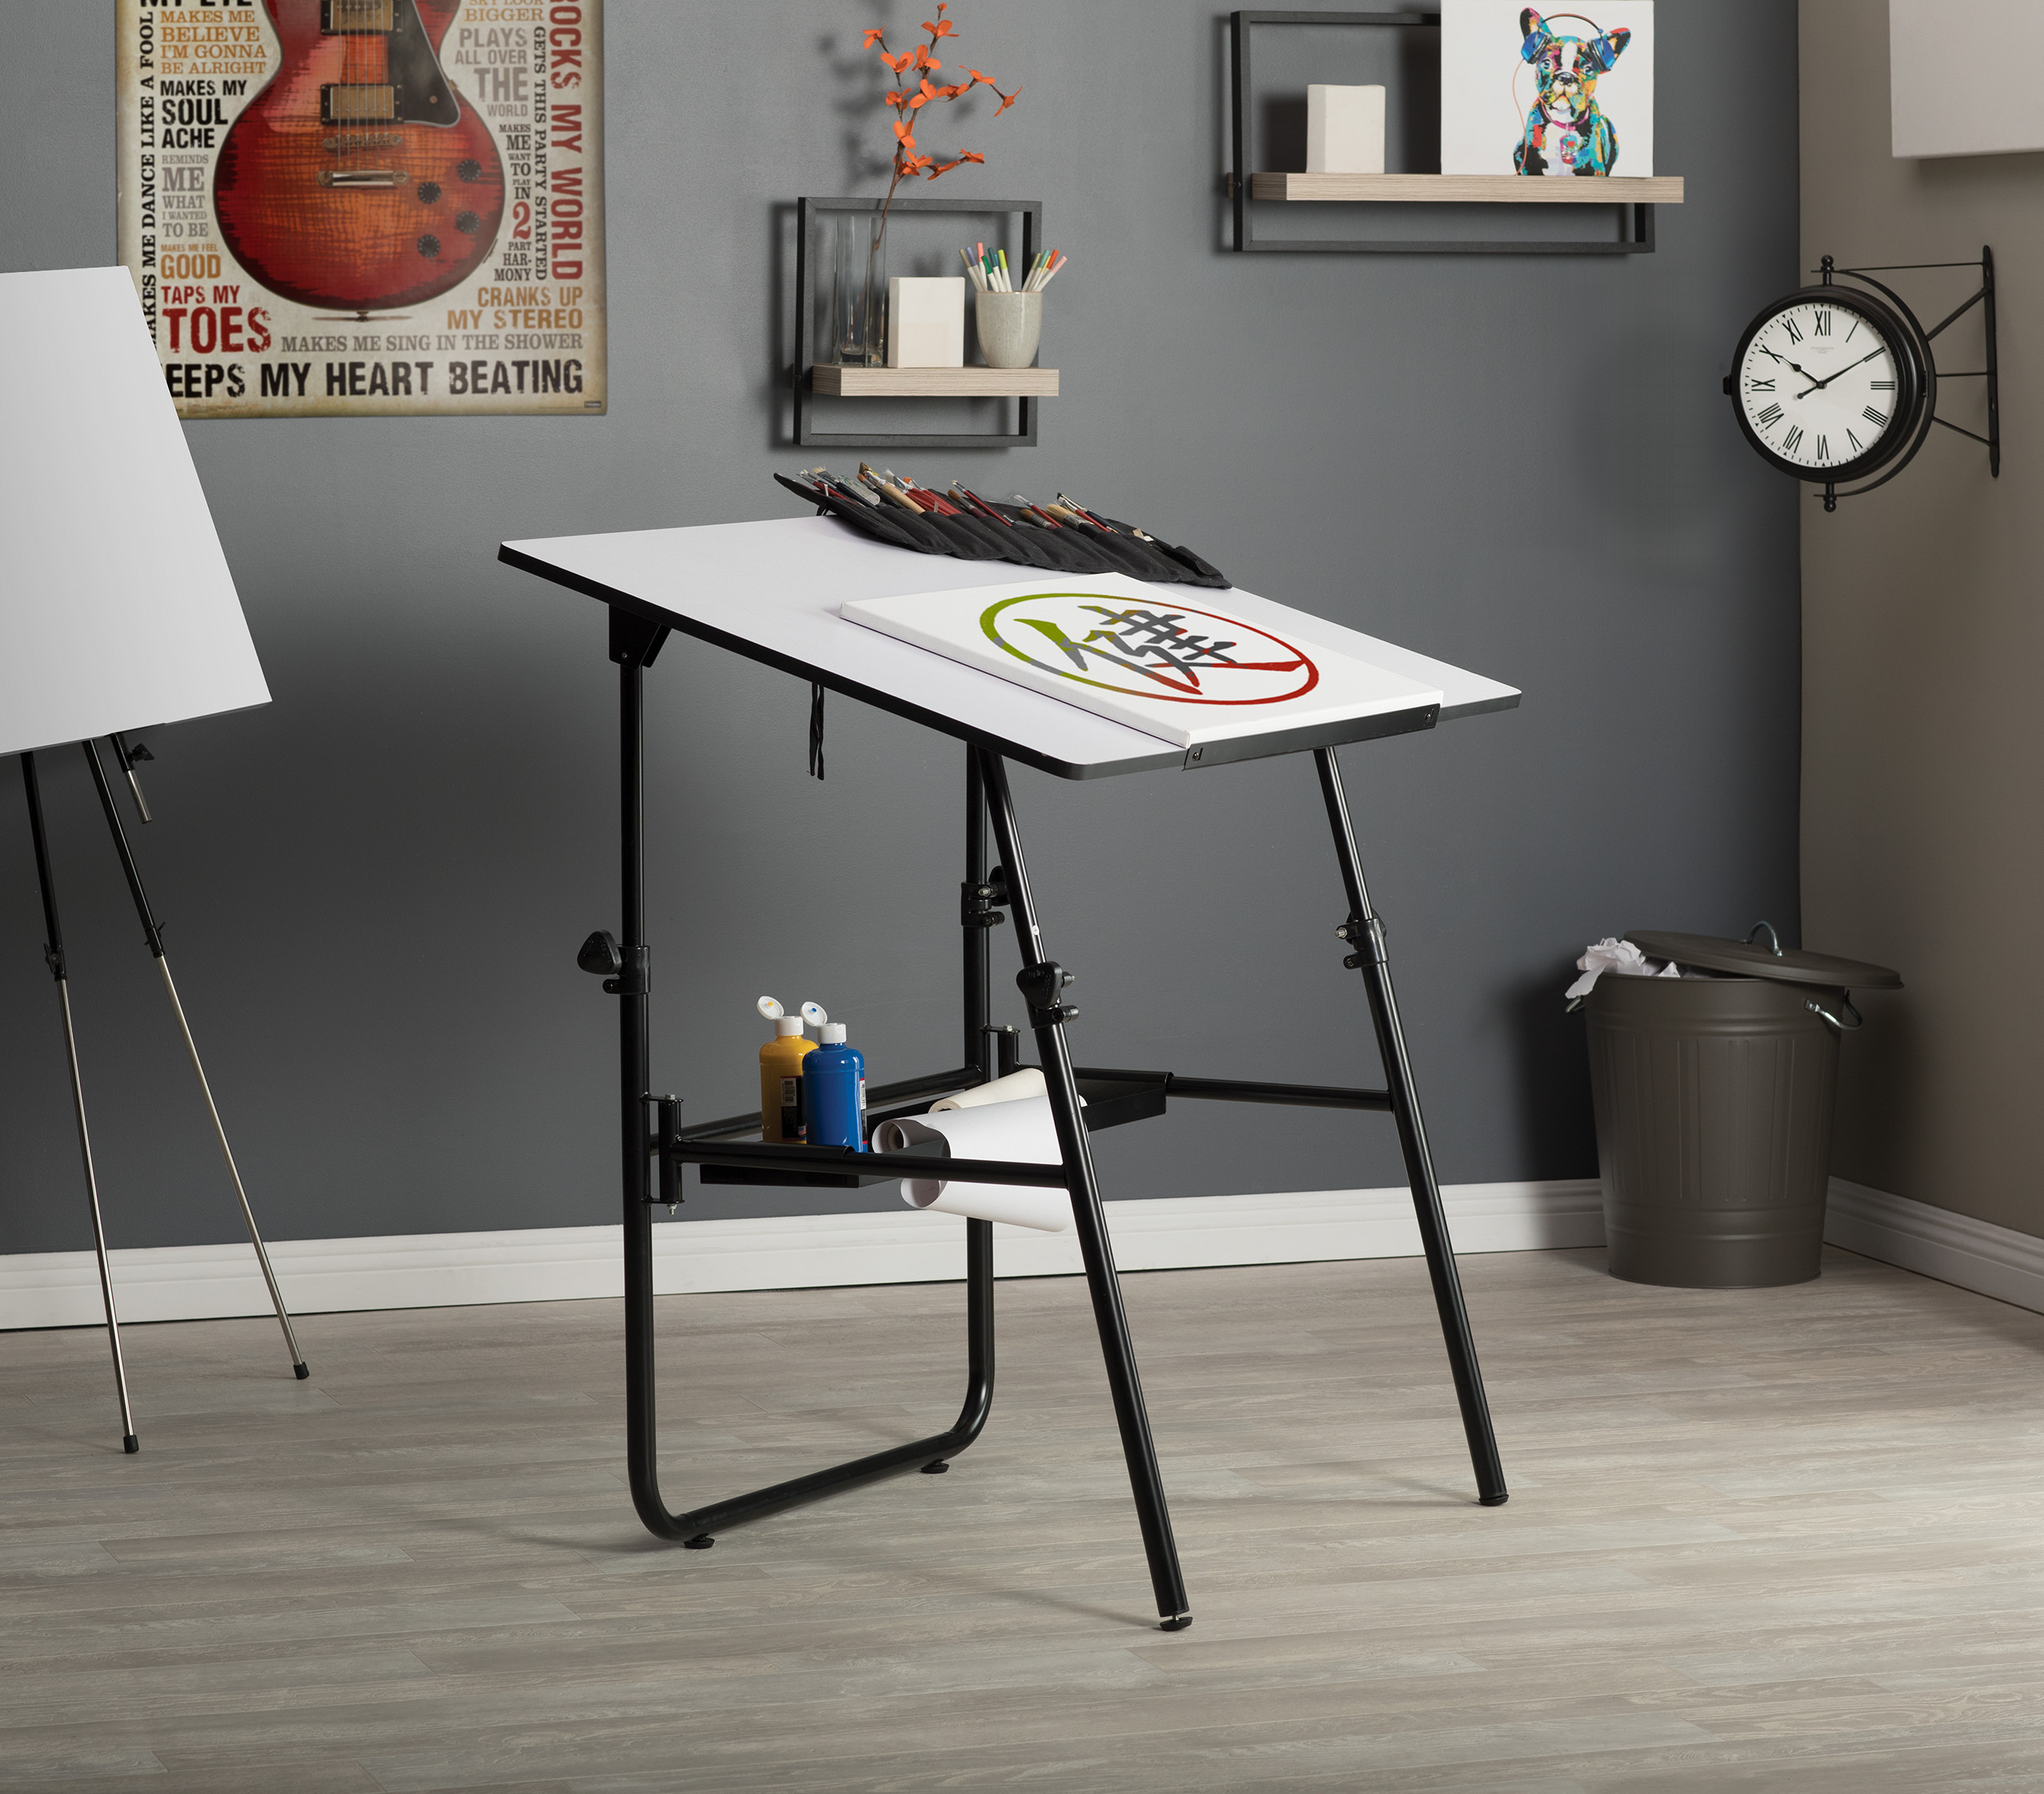 Studio Designs Ultima Drafting Table with Adjustable Fold-A-Way Base and 42"x 30" Top - image 1 of 14